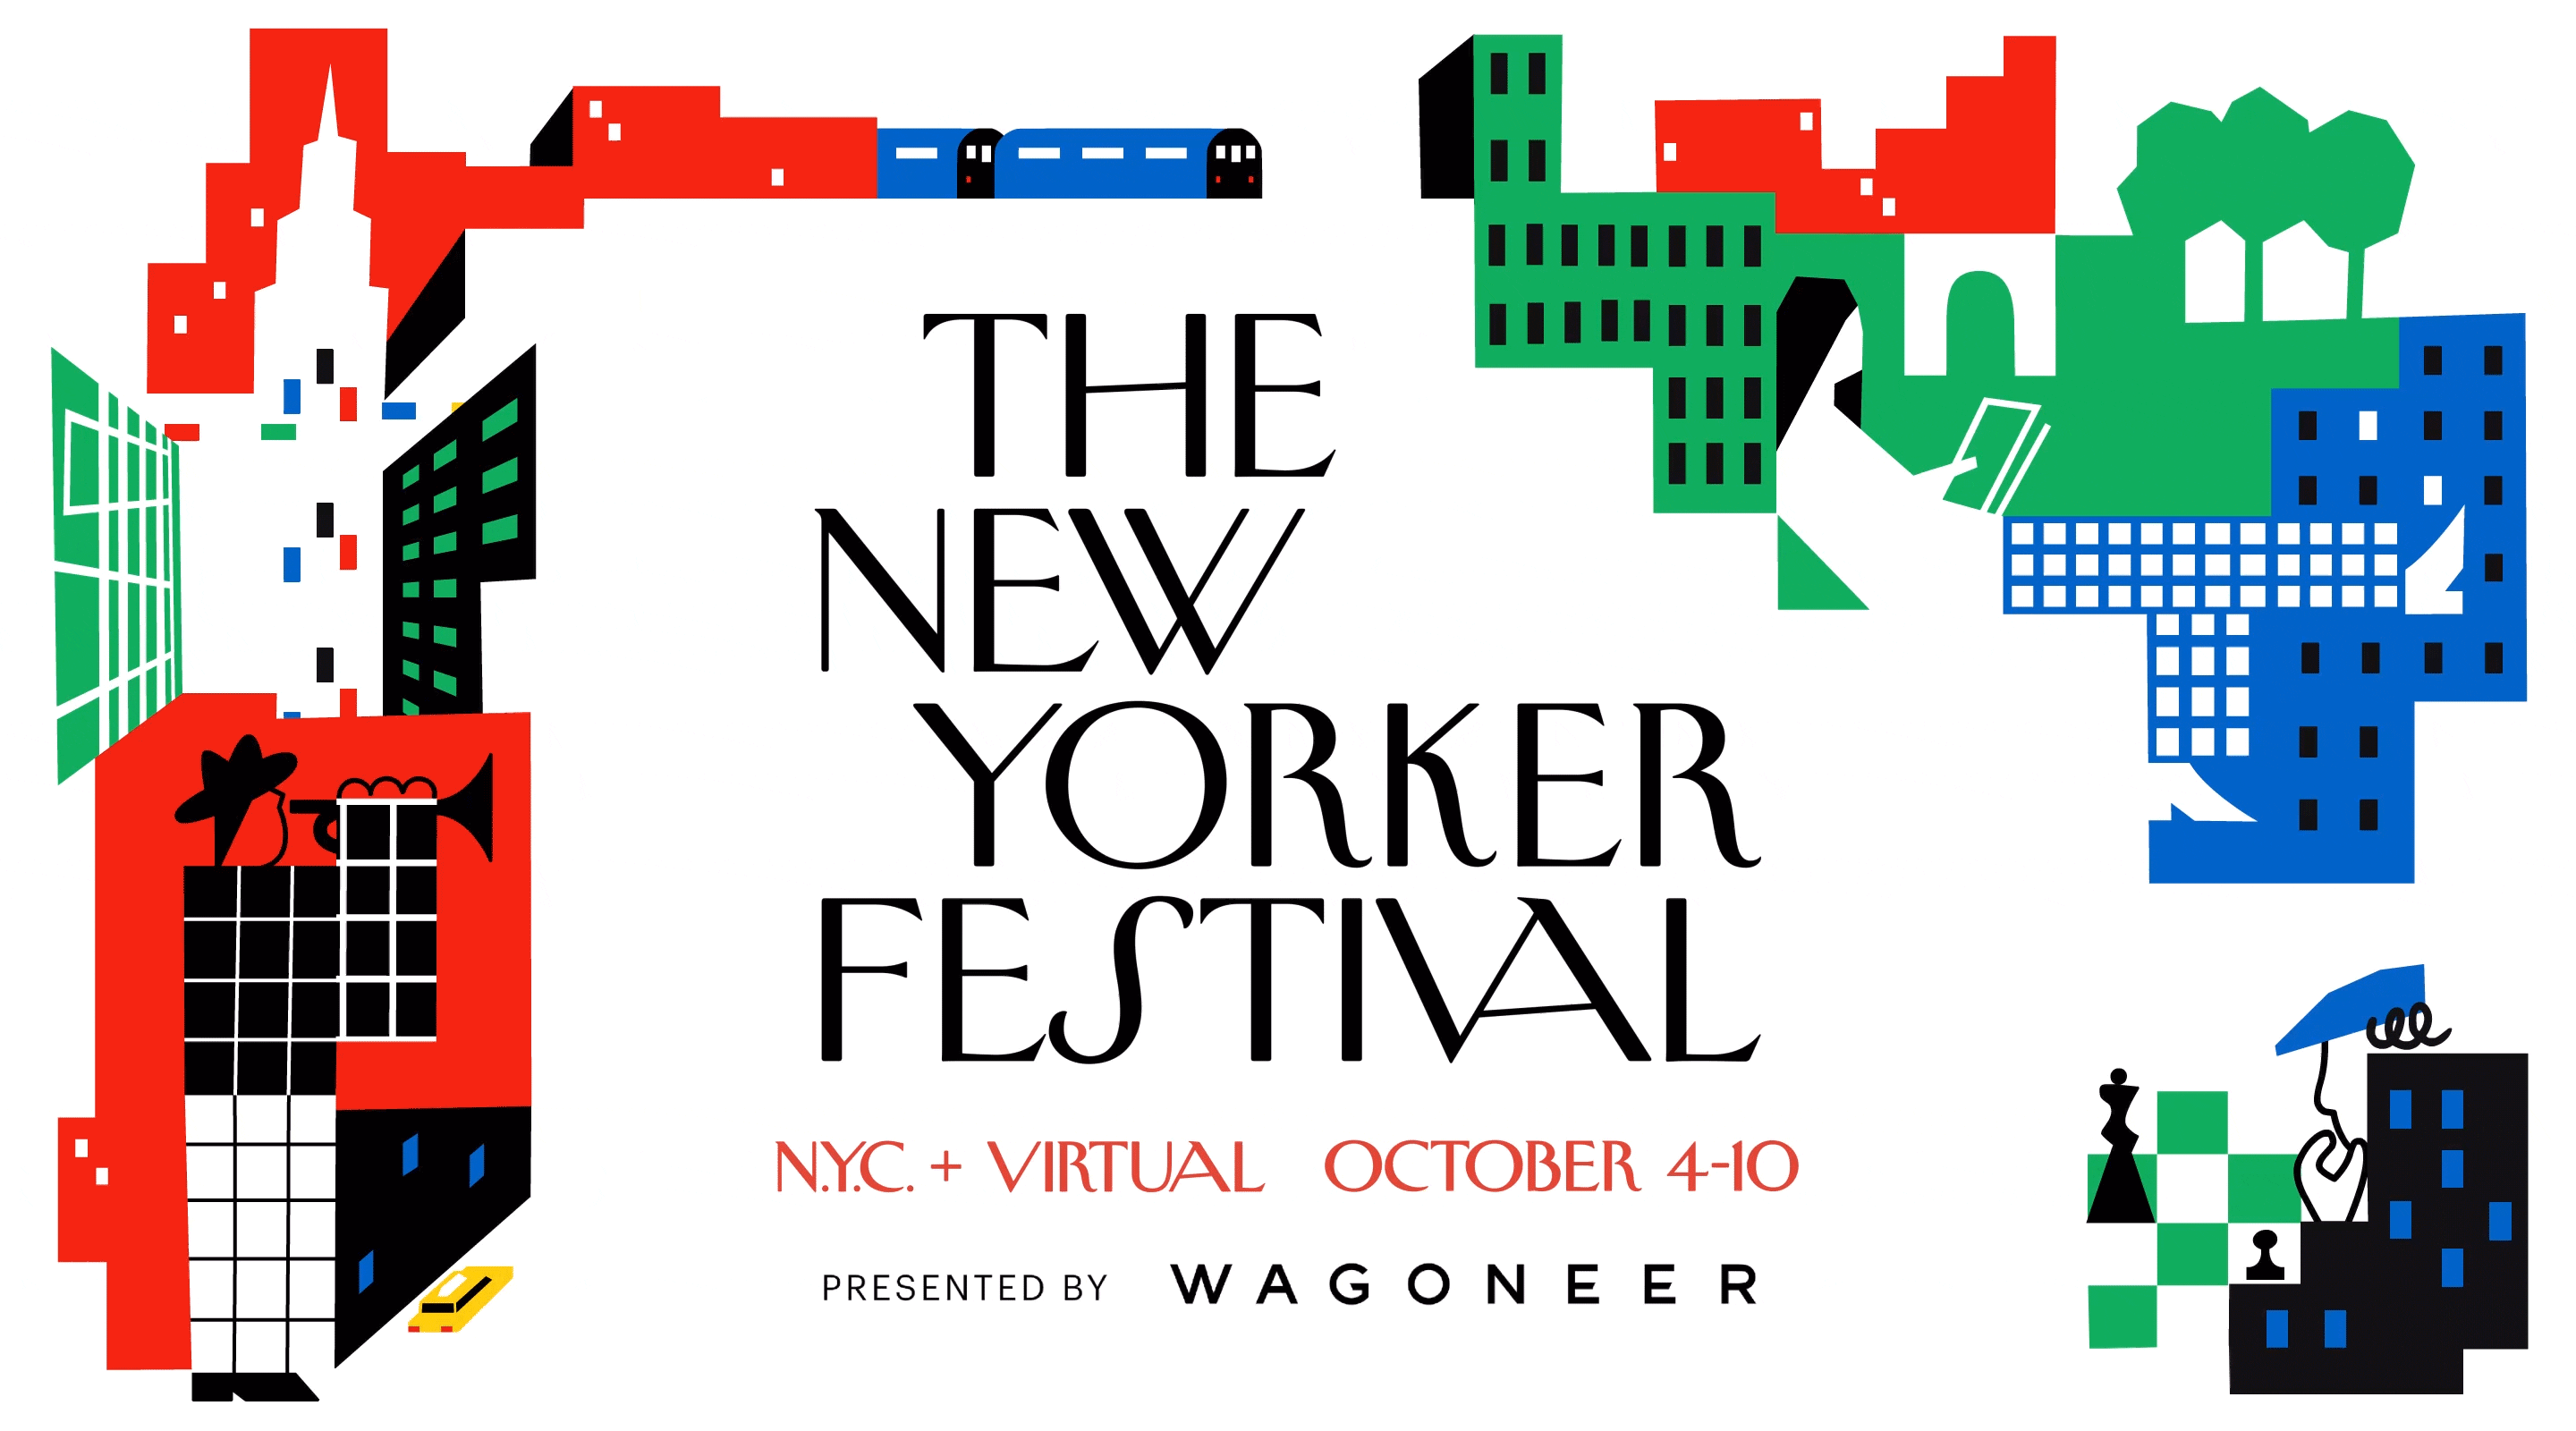 The New Yorker Festival GIF poster with a subway train moving, cars driving, a person playing the trumpet, a person playing chess, and a person reading. Blue, green, and red buildings are around the border. 